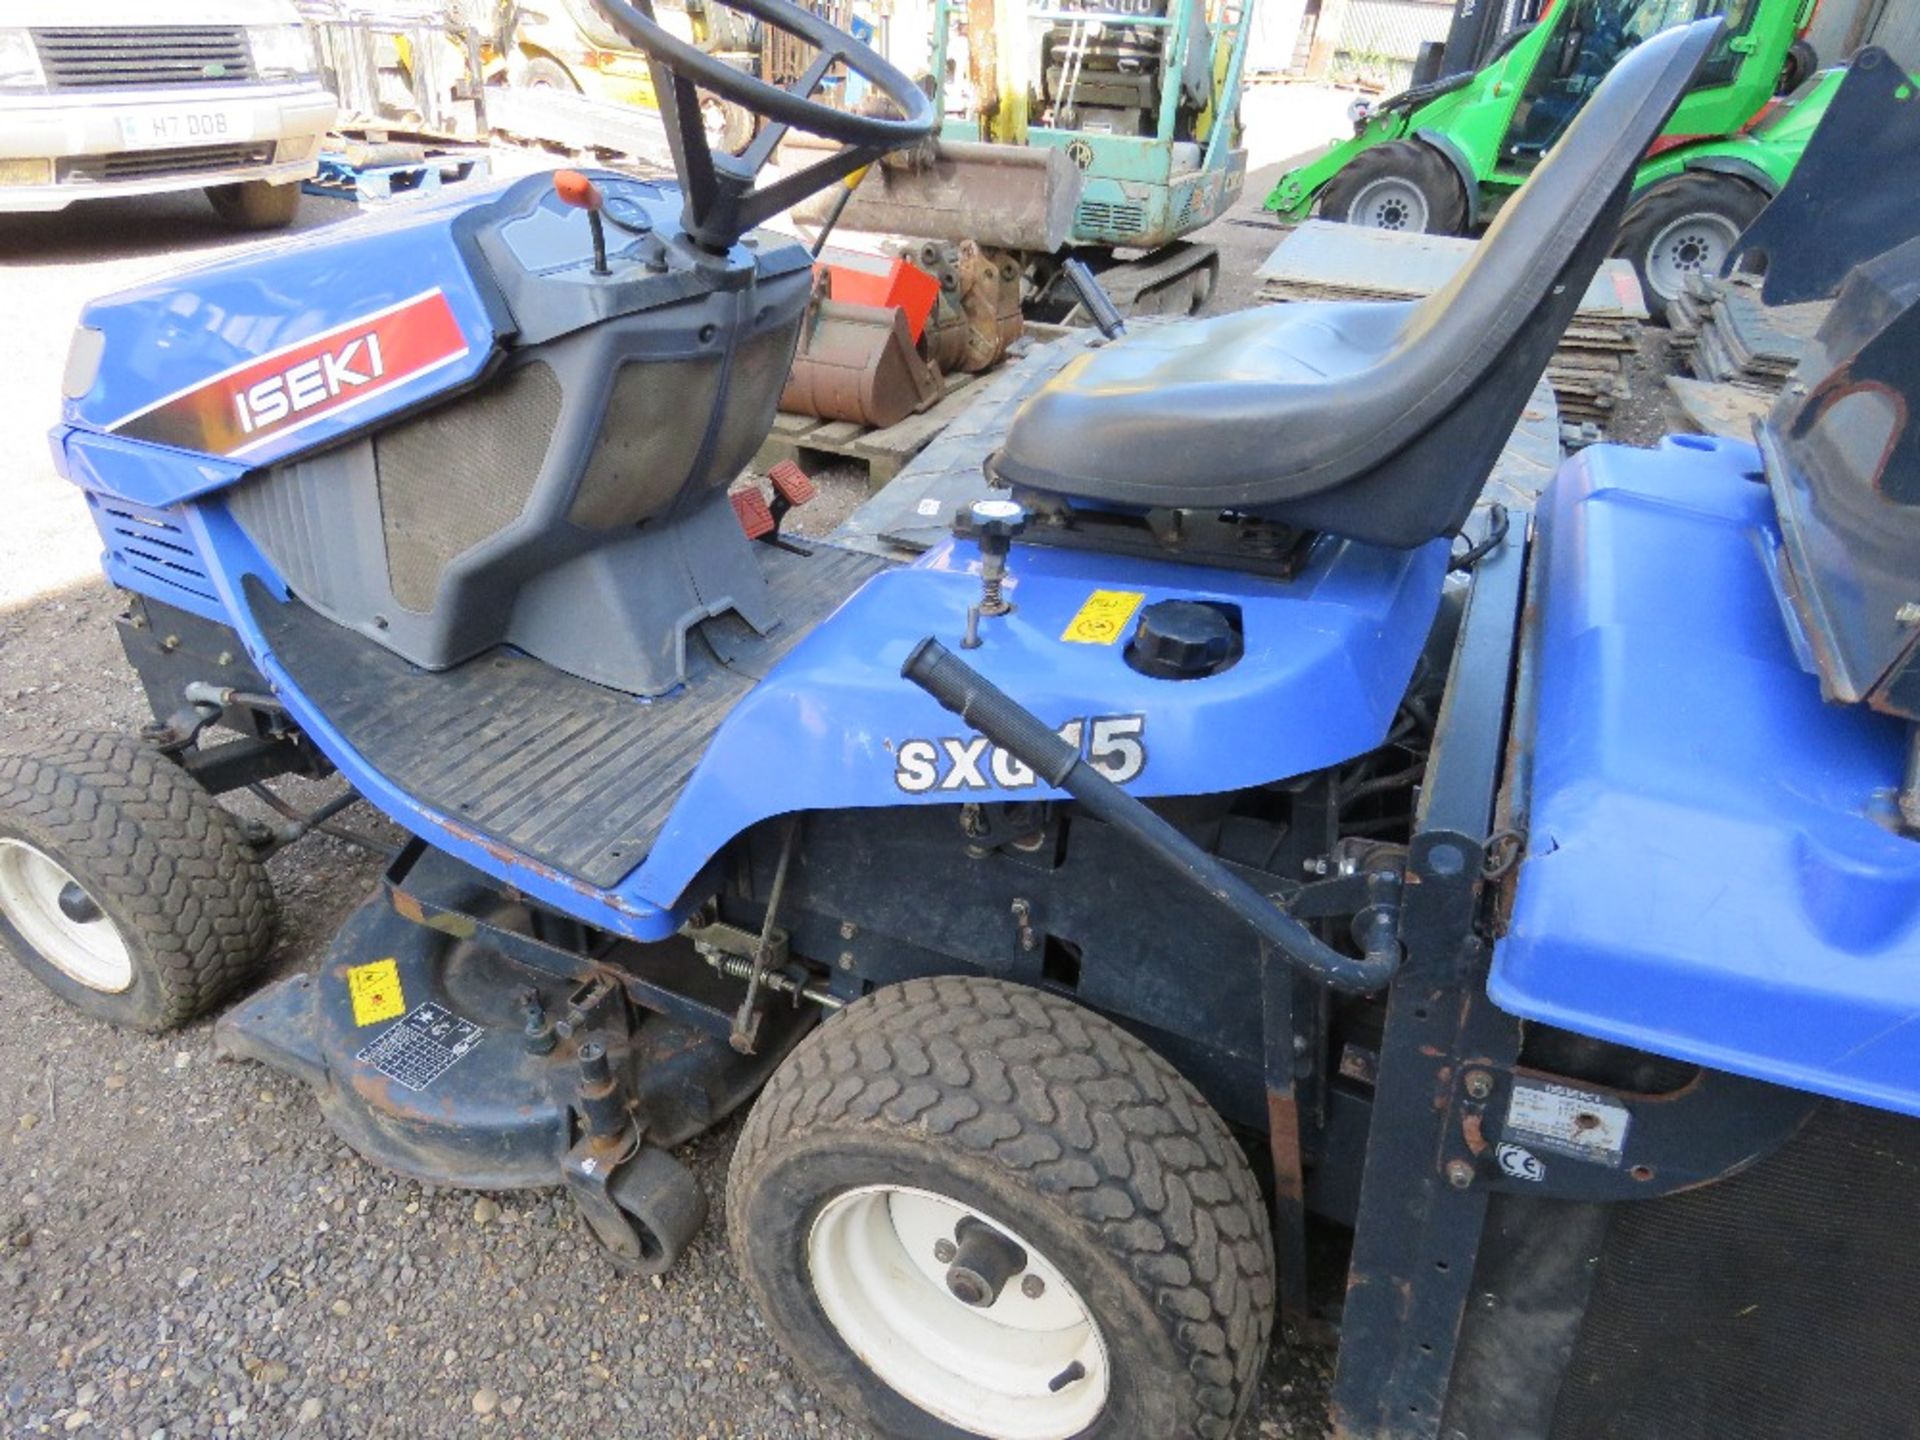 ISEKI SXG15 RIDE ON DIESEL LAWNMOWER WITH COLLECTOR. 531 REC HOURS. SN:H000816. WHEN TESTED WAS SEEN - Image 6 of 14